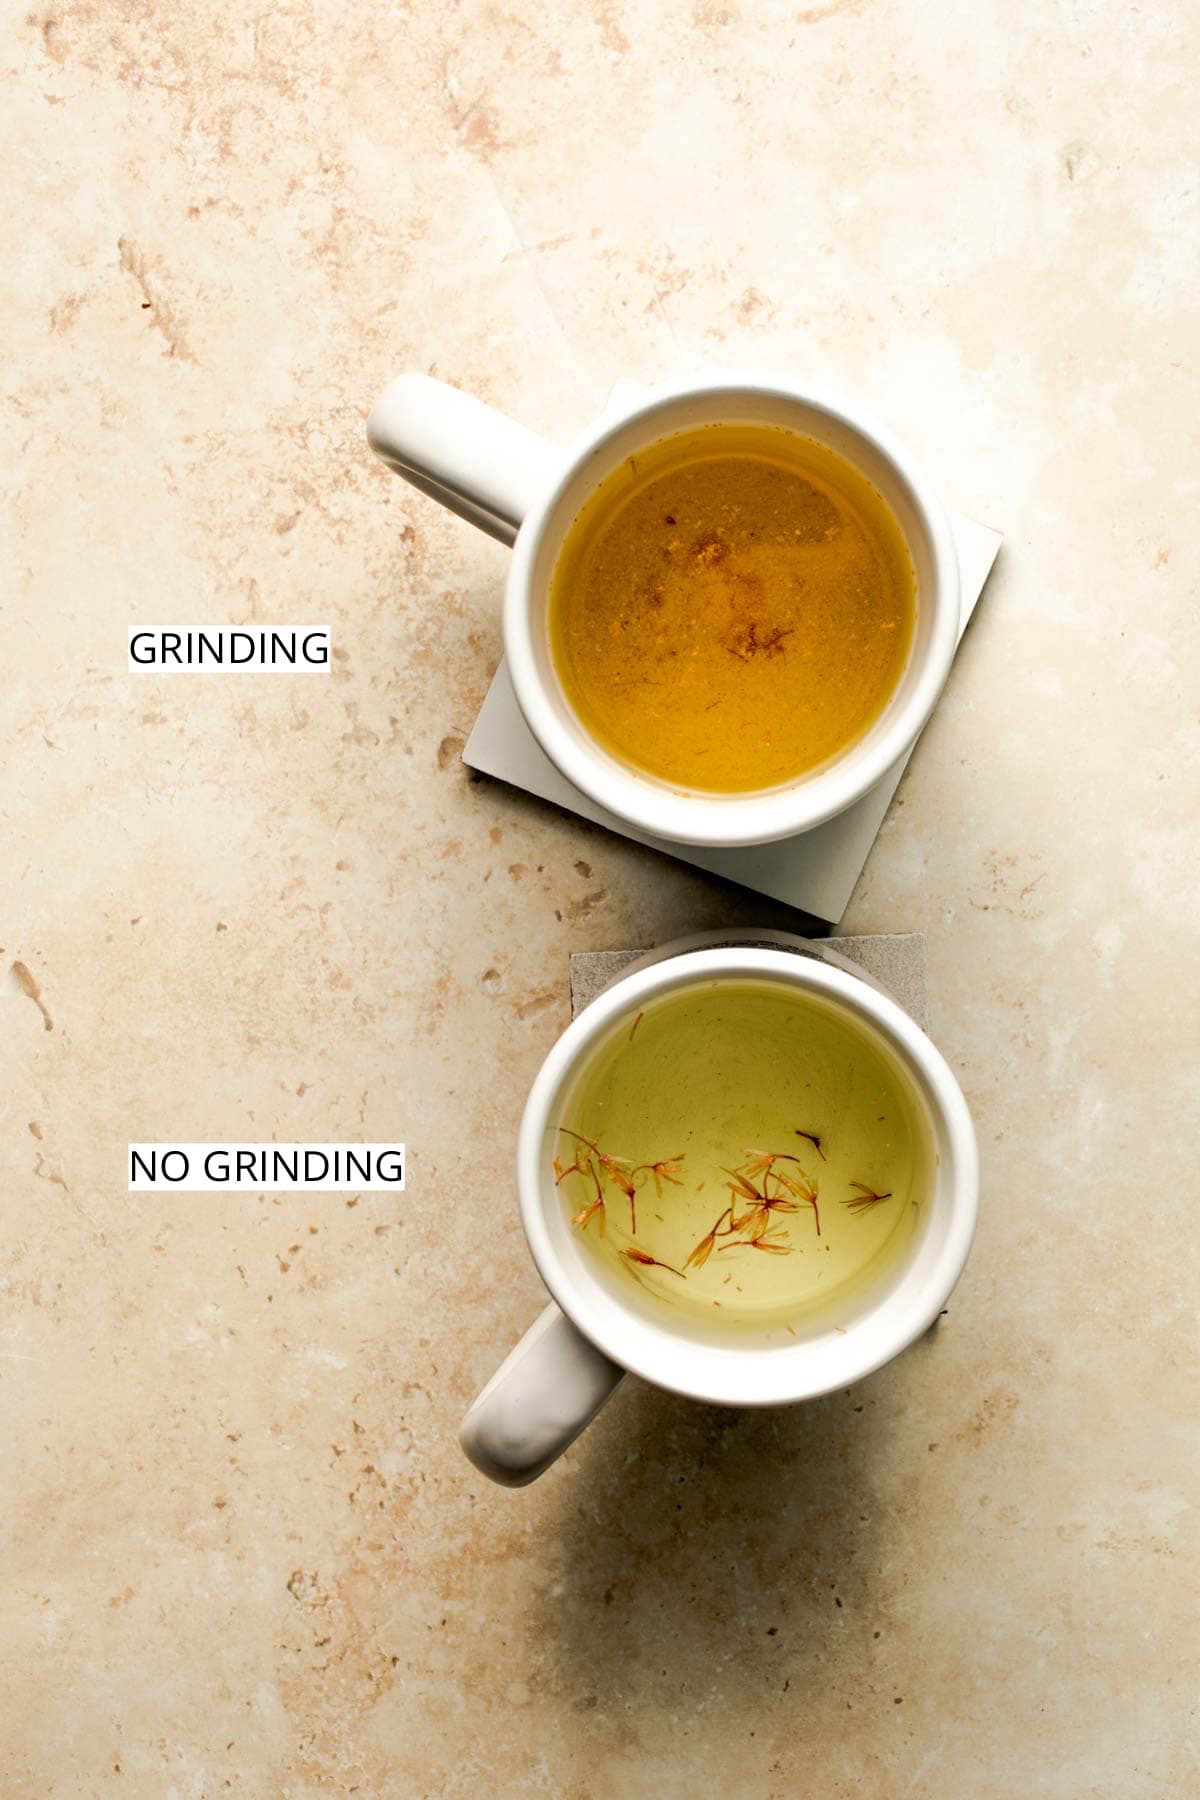 Two mugs showing the difference between grinding and not grinding saffron.